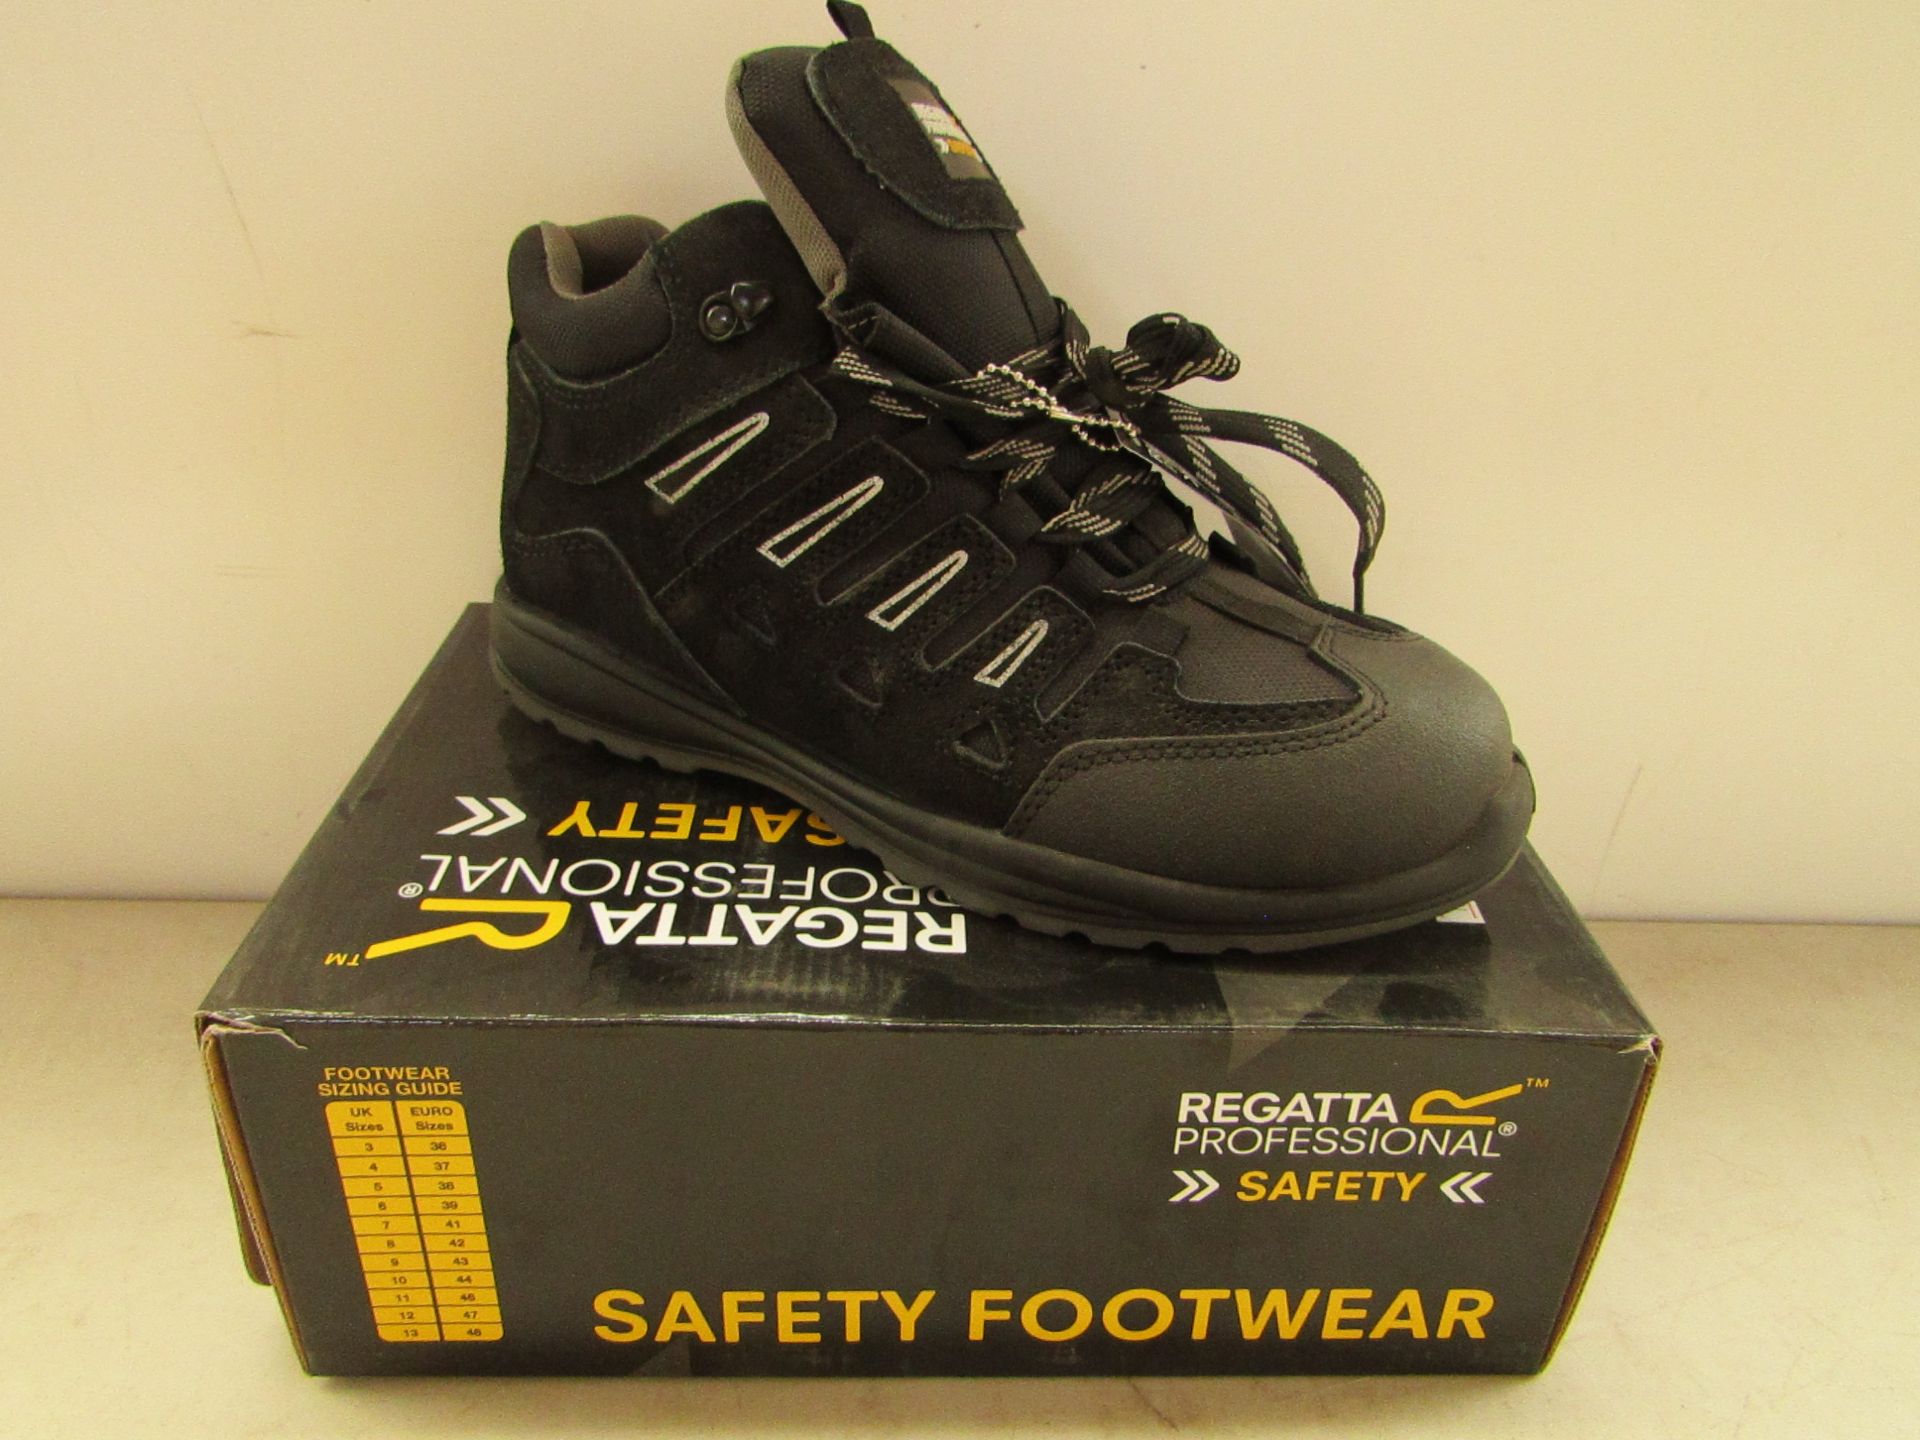 Regatta Professional Loader steel toe cap safety hikers, size UK7, RRP £59.99 new and boxed.